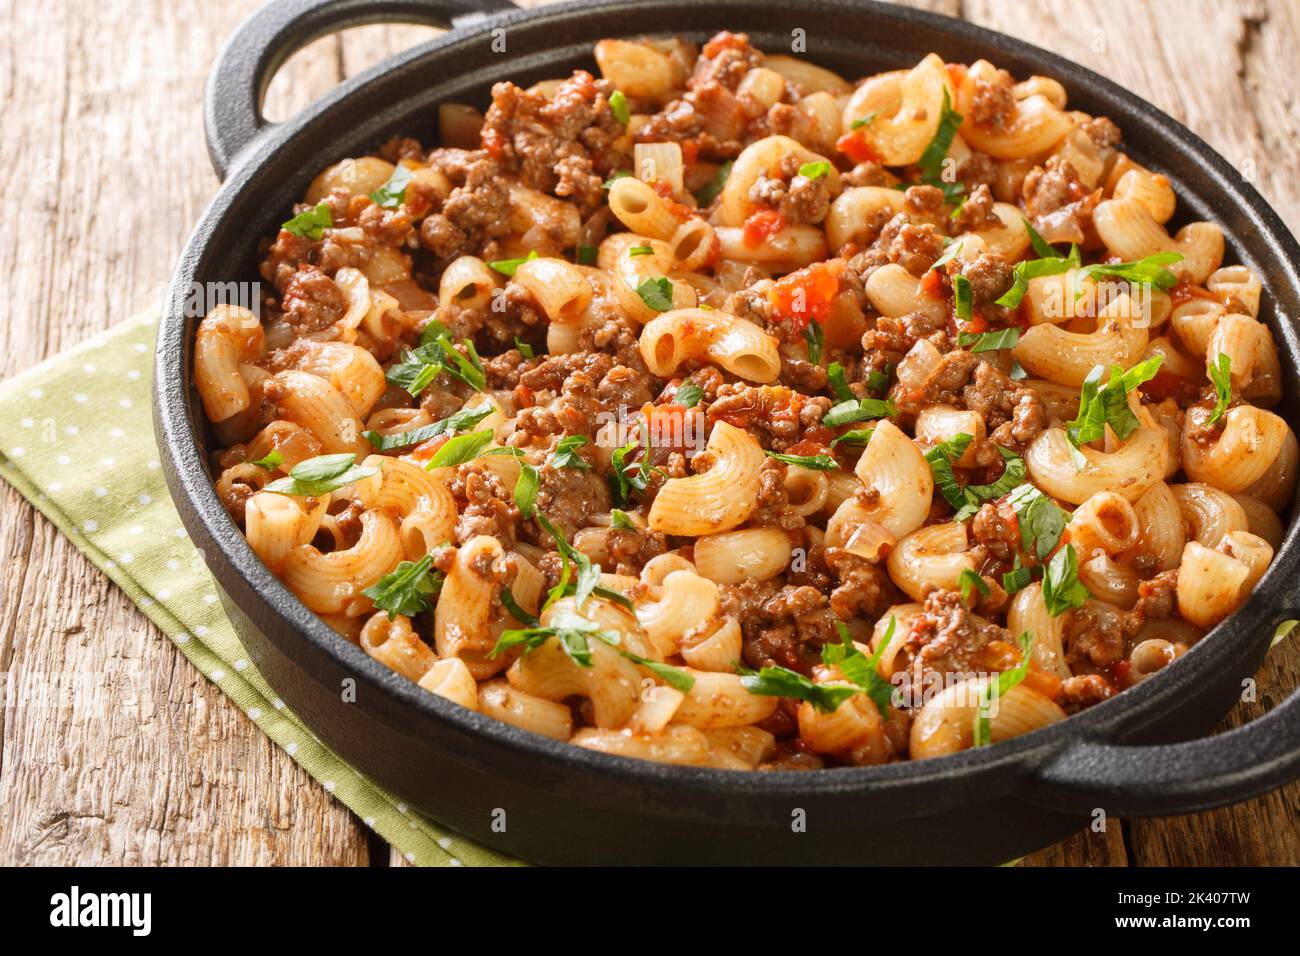 Homemade Hamburger Macaroni and Cheese with Parsley closeup in the pan on the wooden table. Horizontal Stock Photo